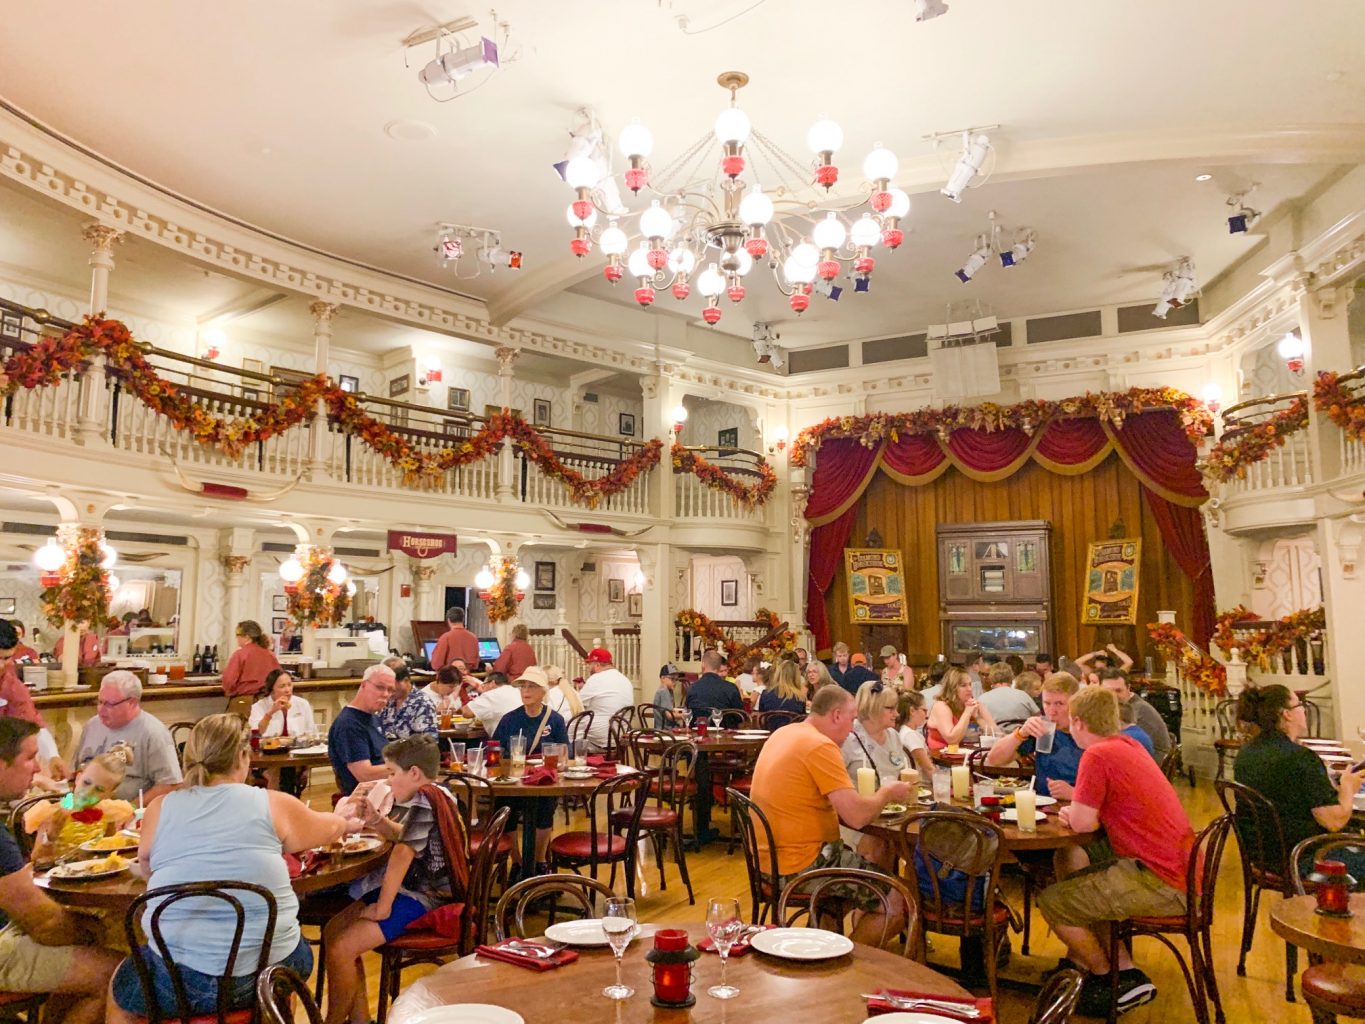 The cowboy-esque dining area with autumn garlands is reminiscent of Liberty Tree, but the lack of crowds in the Diamond Horseshoe show how not great the food is here: don't mistake this place for one of the best Magic Kingdom Restaurants. 